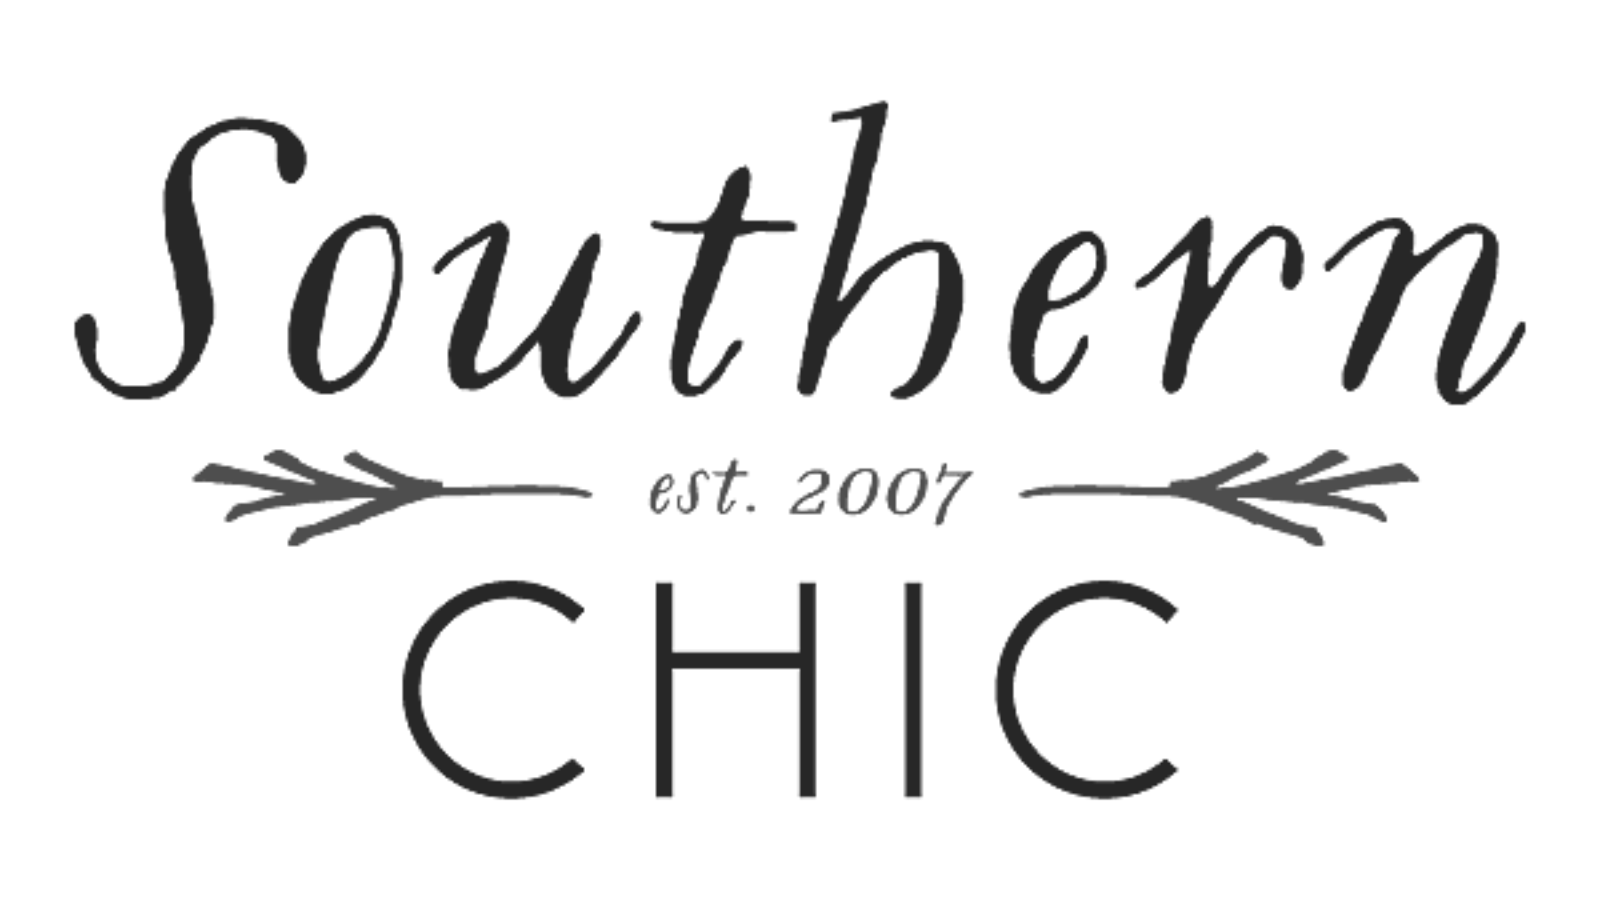 Southern Chic Home